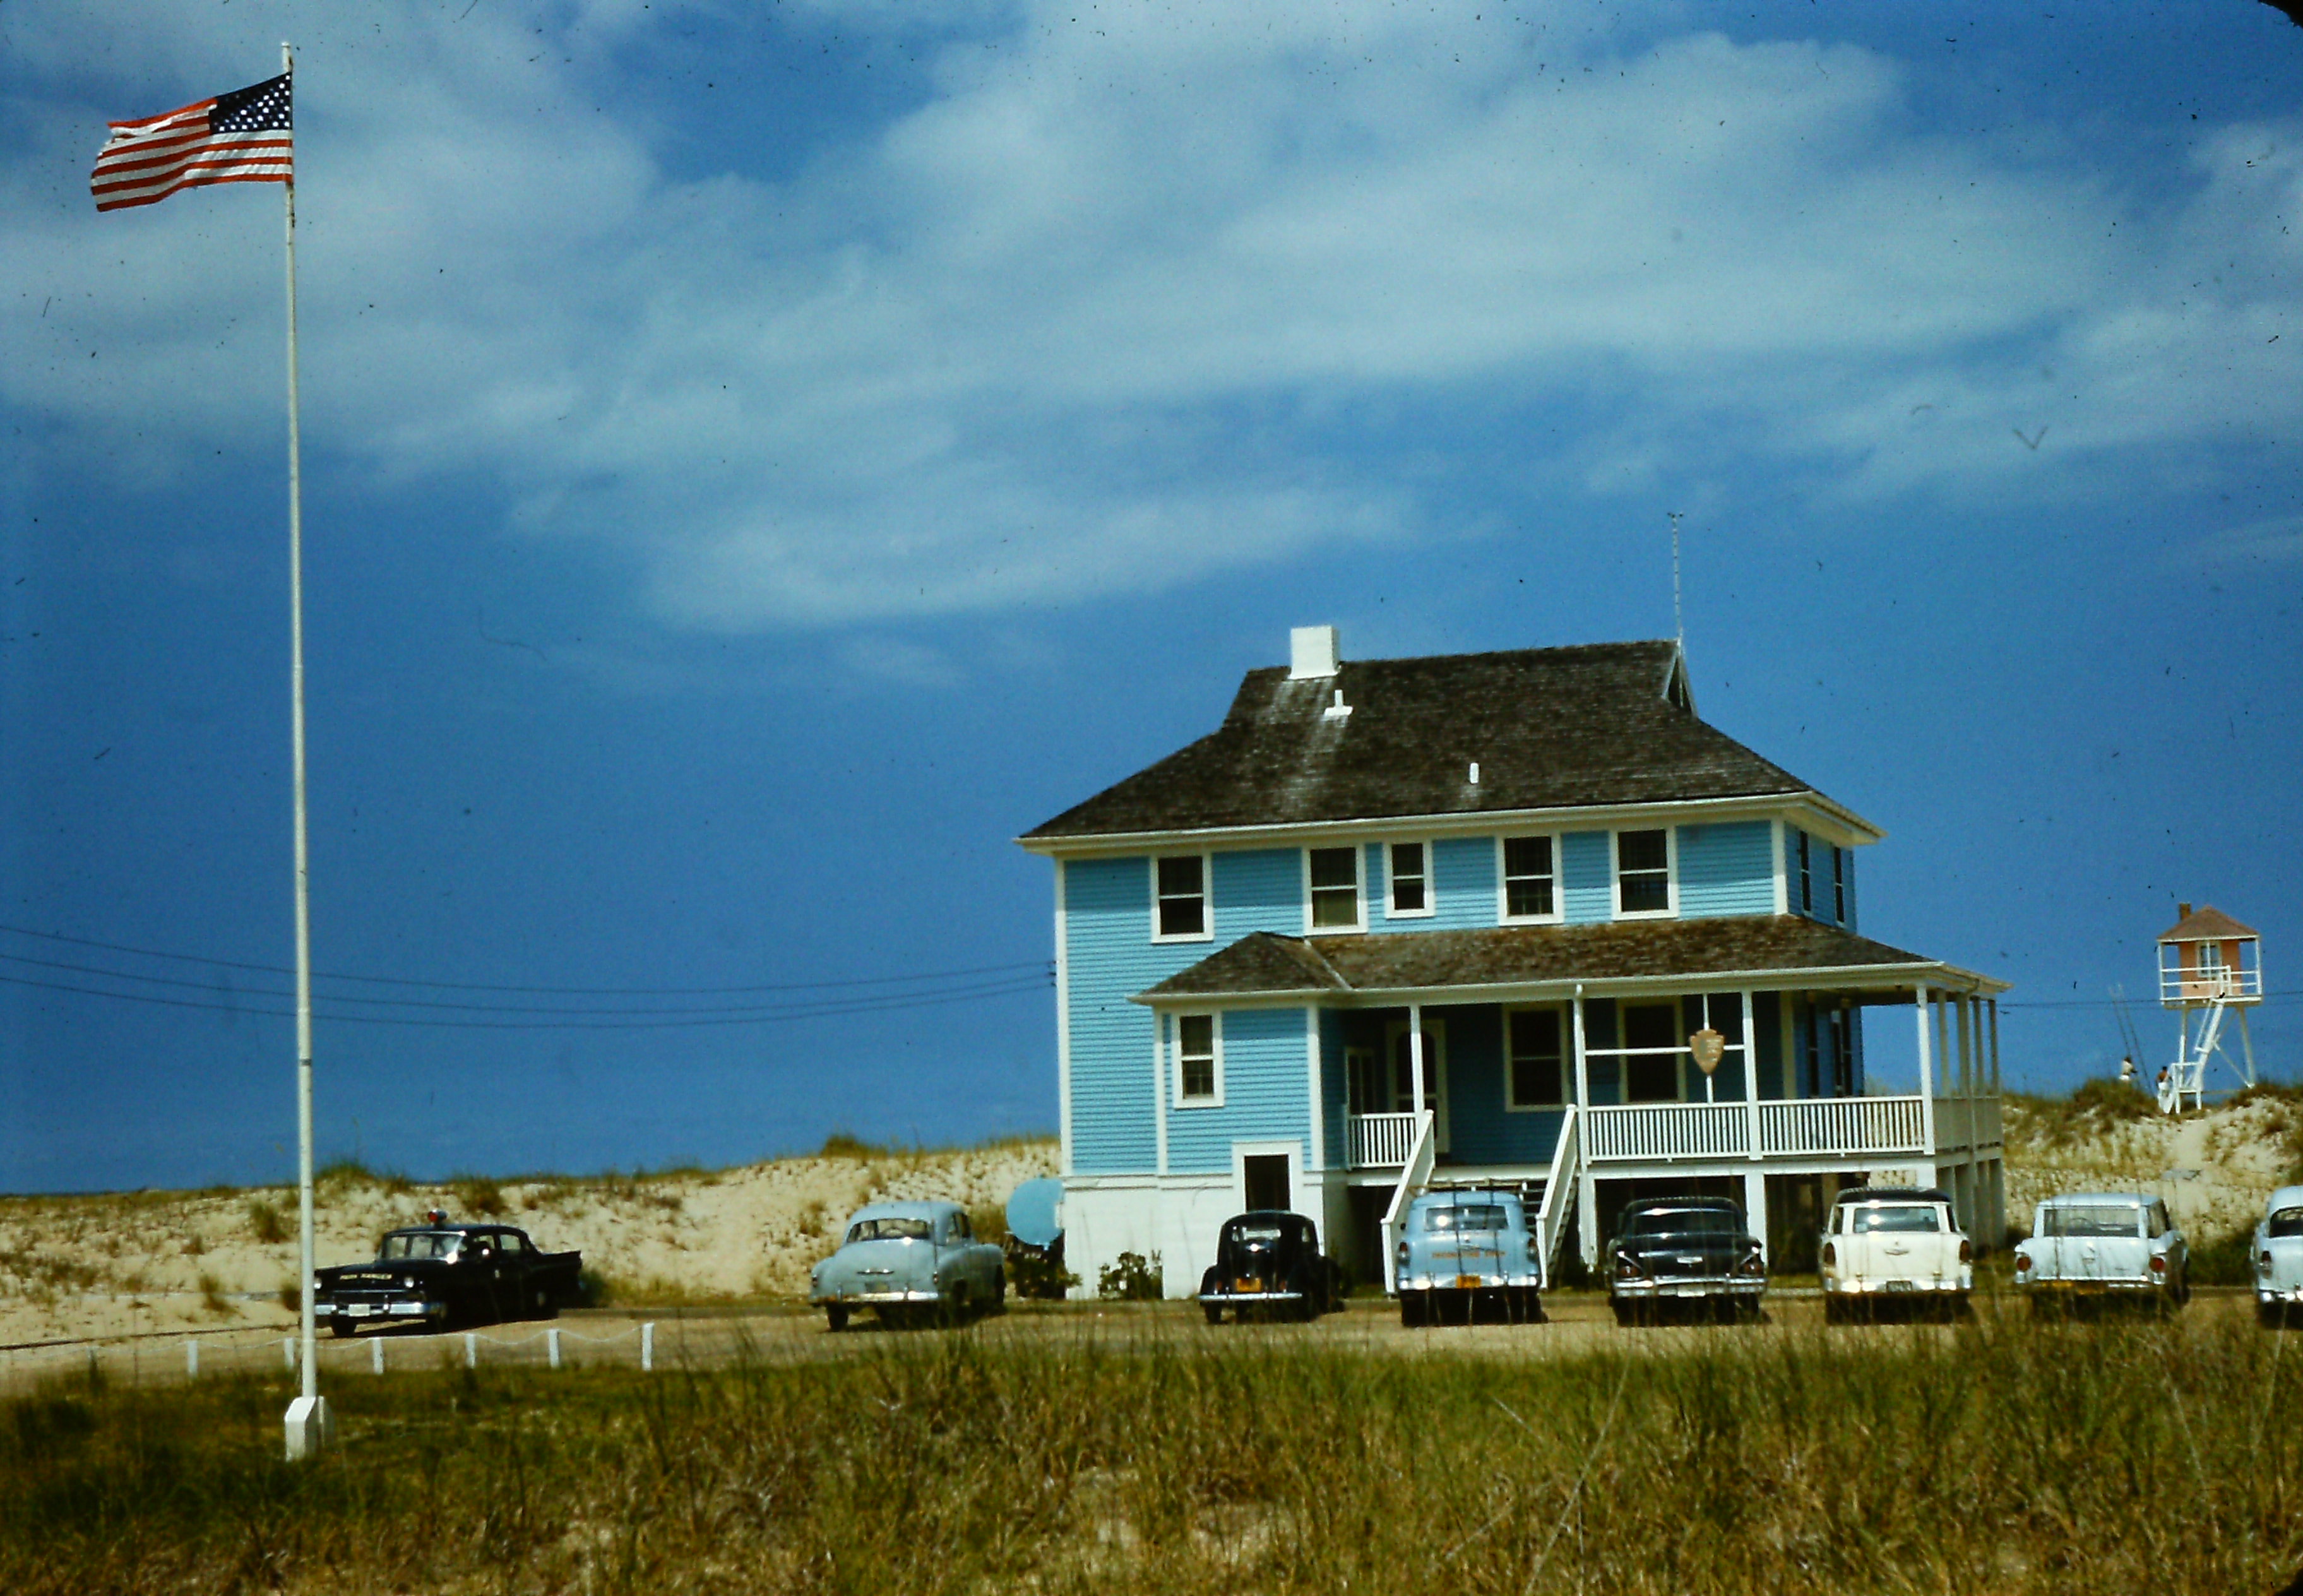 The 1925 Bodie Island Coast Guard Station served as park headquarters from the mid-1950s to the mid-1960s.